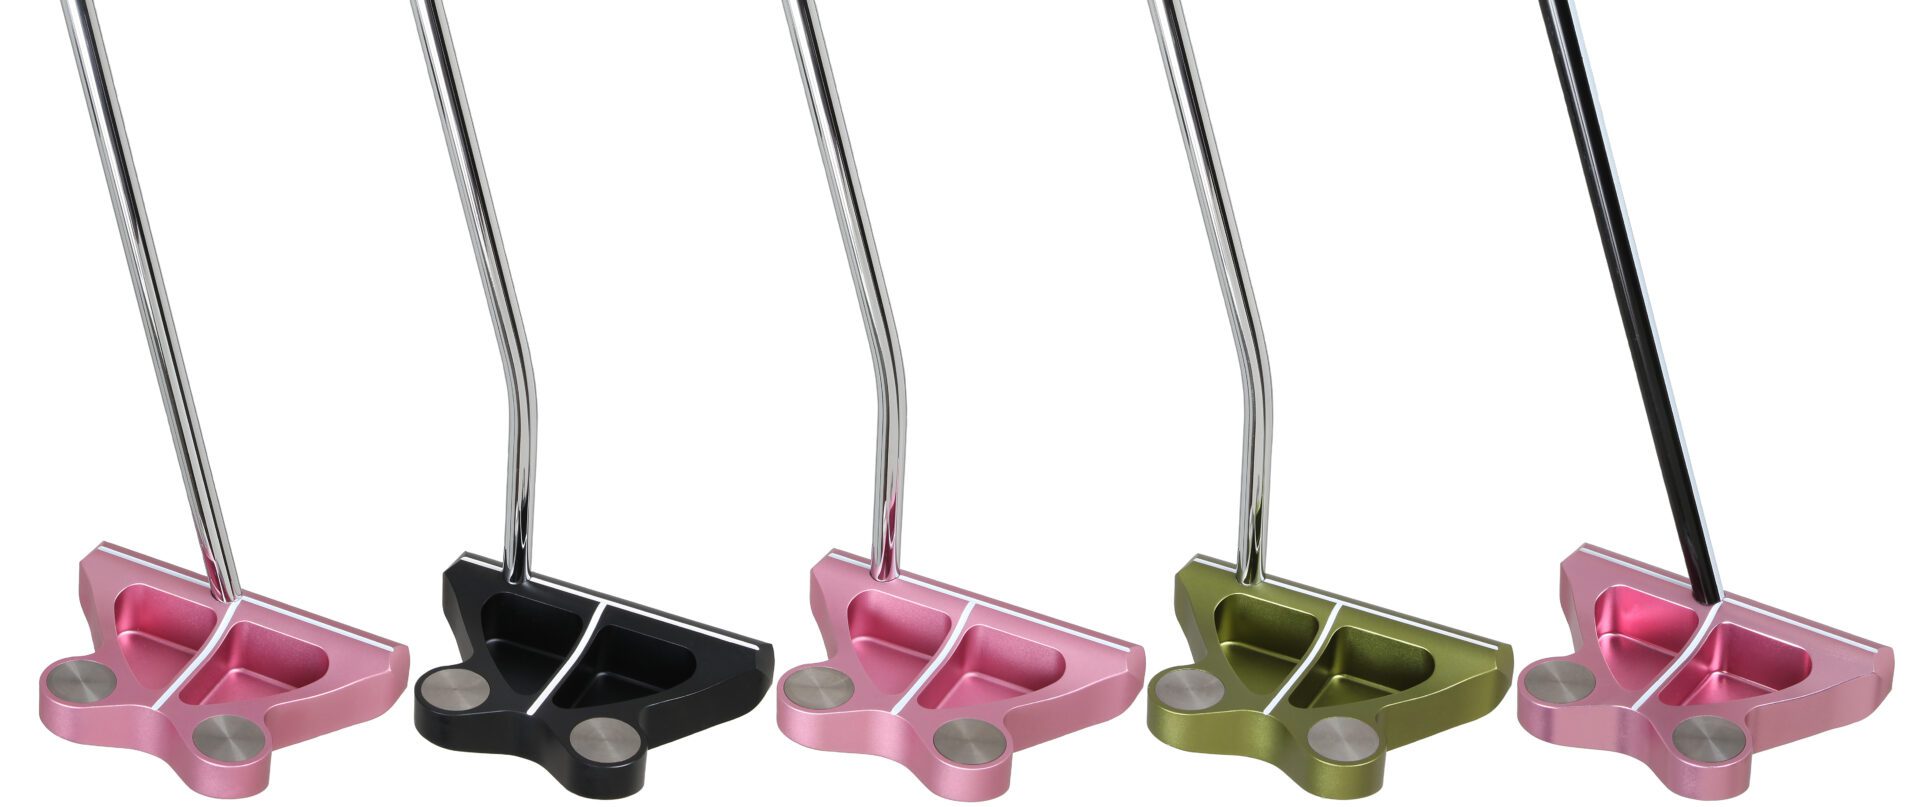 Buying a Golf Putter